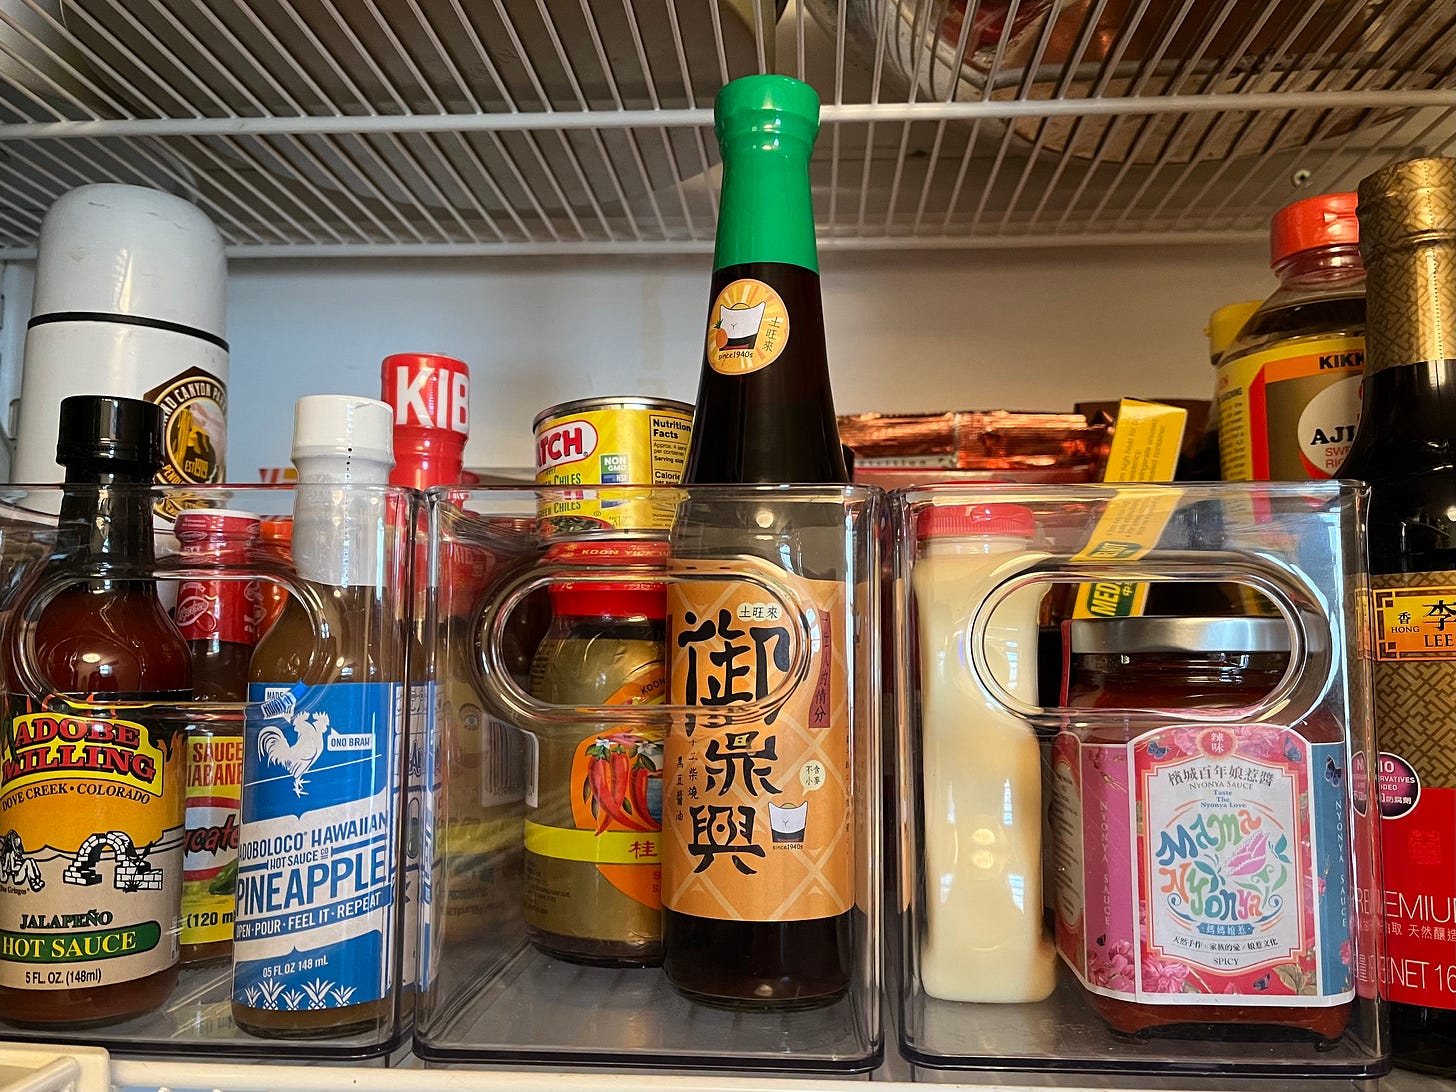 Jars and bottles of sauces on a pantry shelf